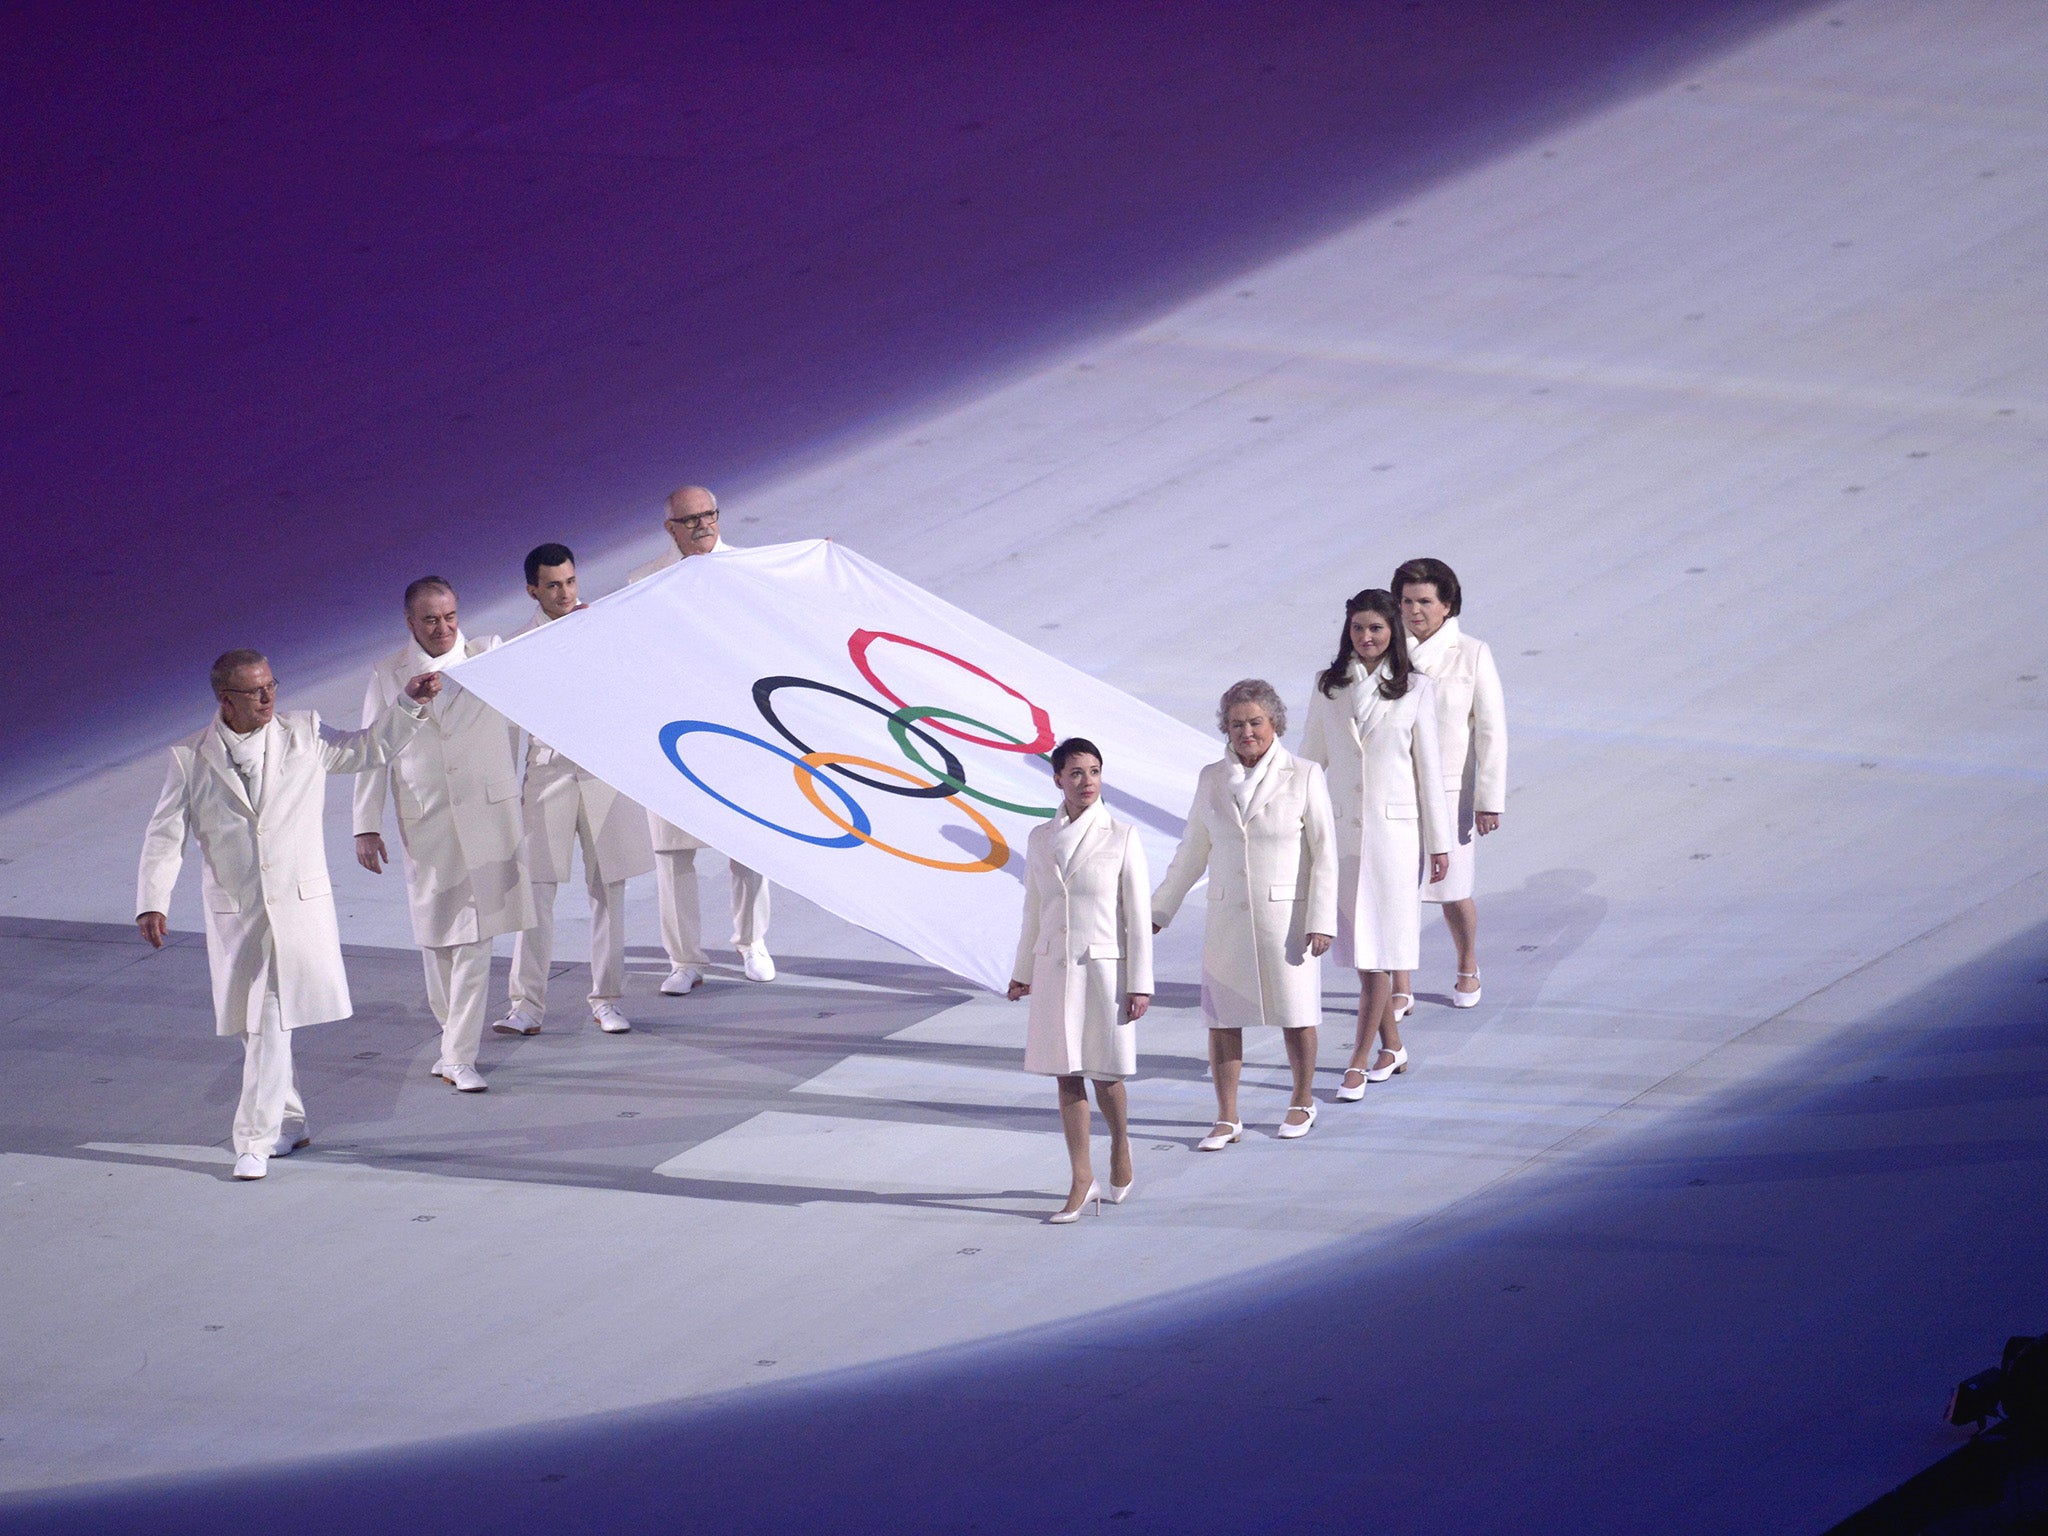 The refugee team will walk with the Olympic flag during the opening ceremony